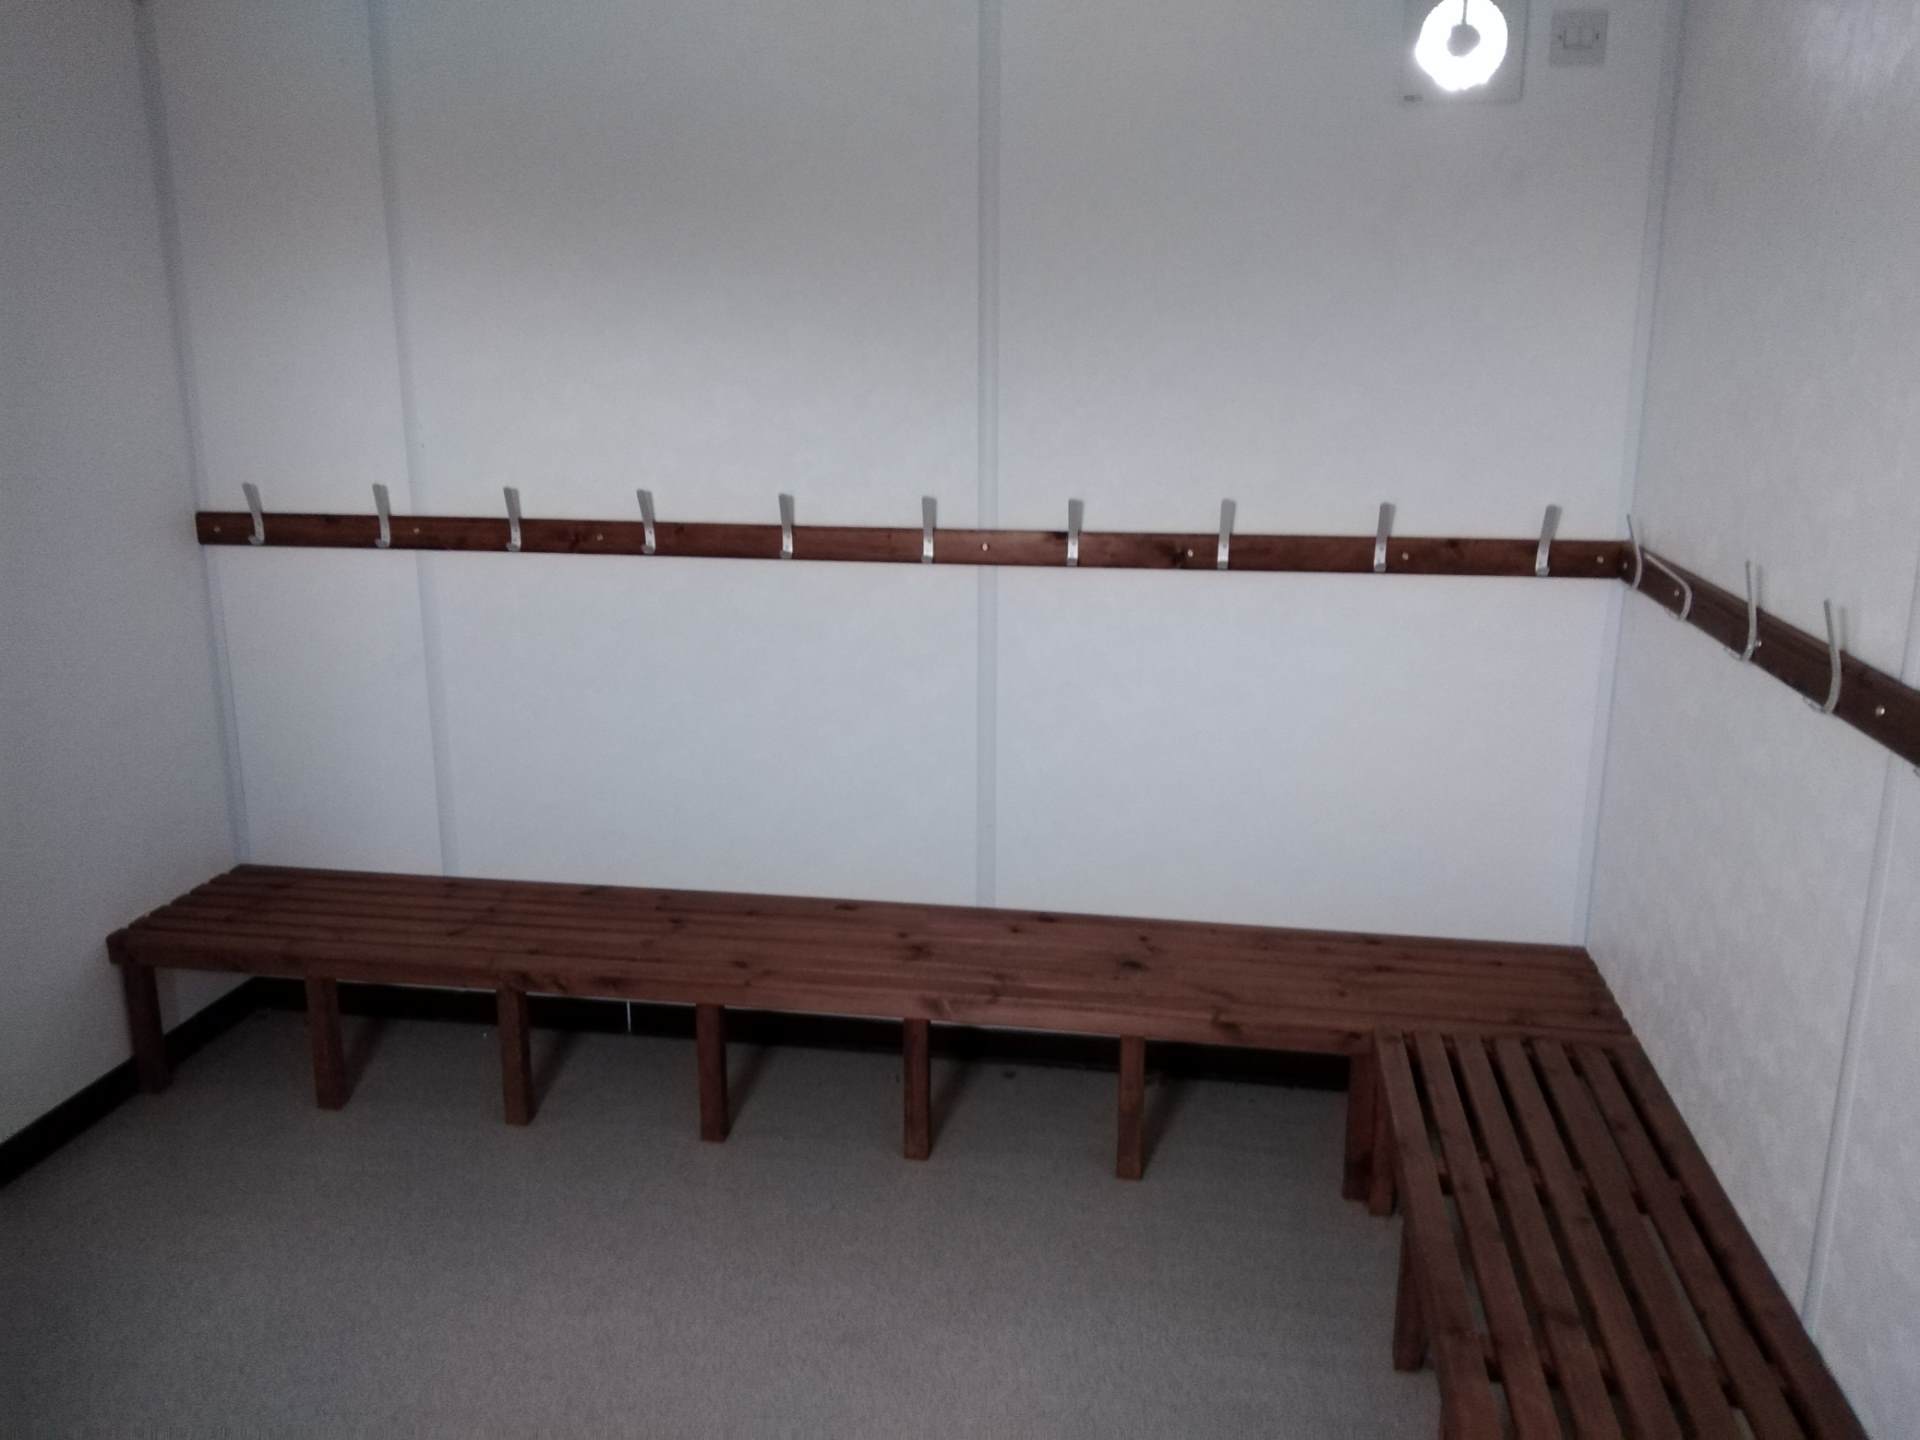 Mini pitch changing rooms